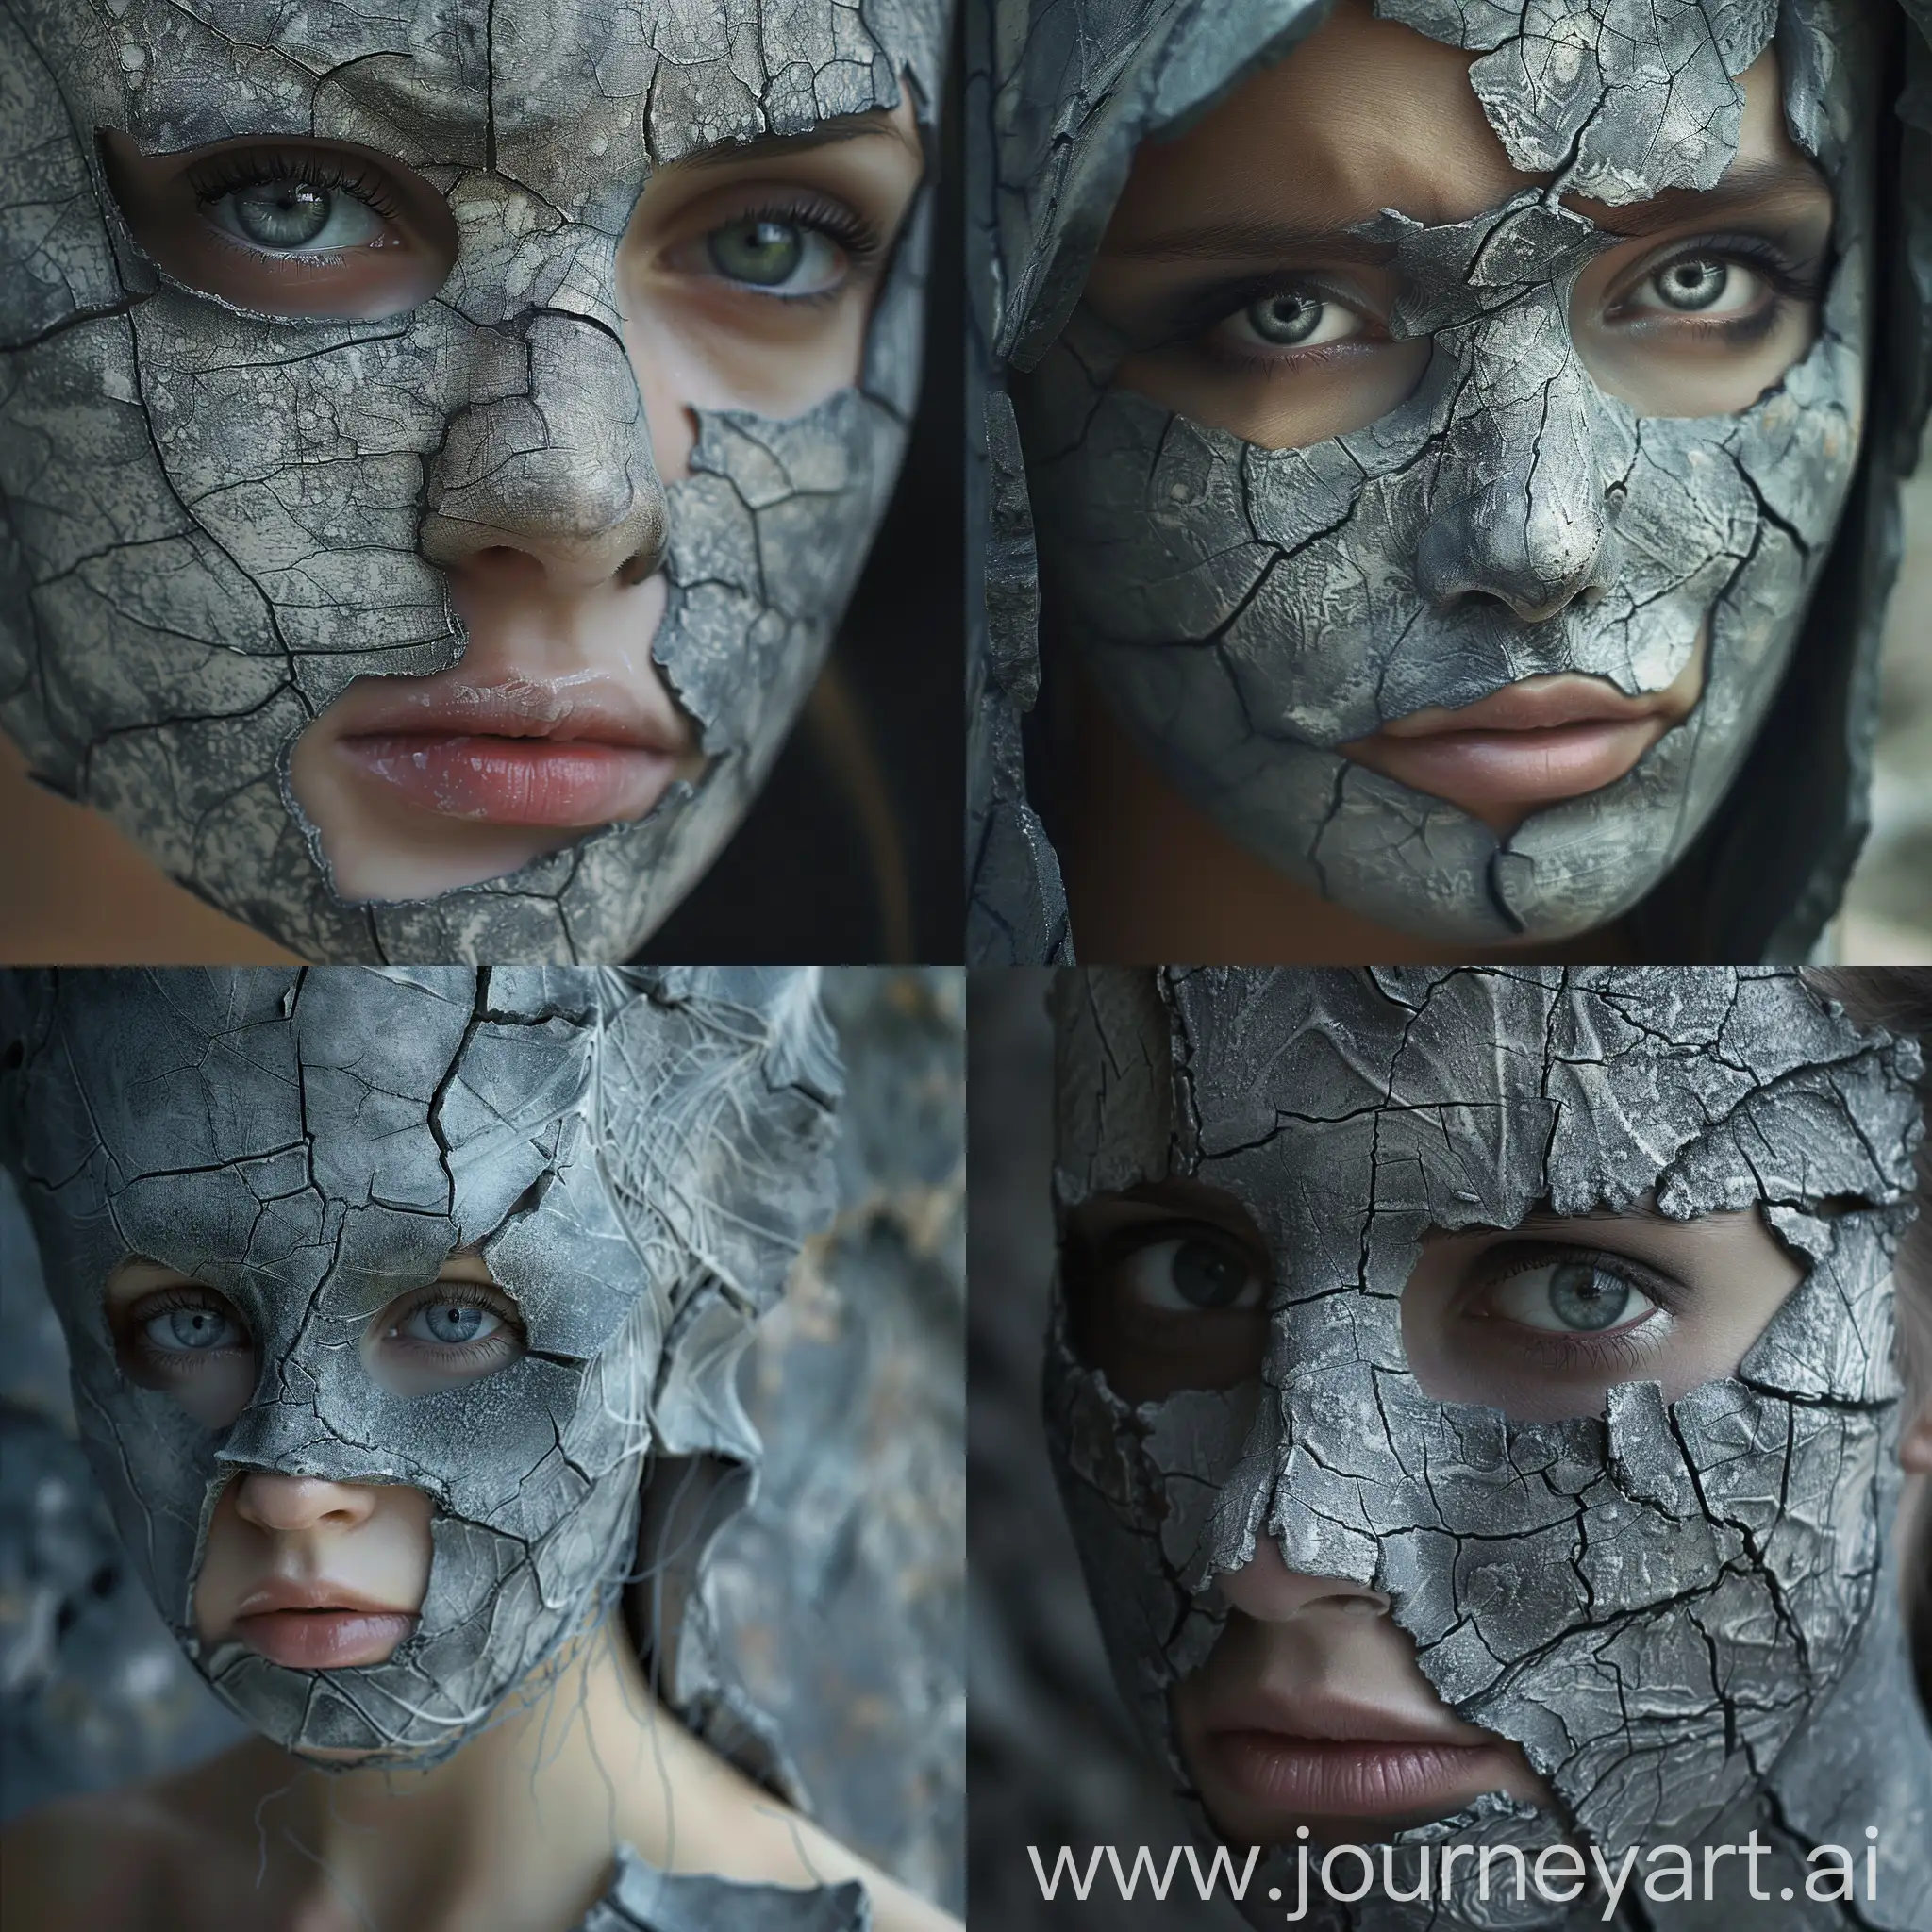 Ethereal-Woman-with-Melancholic-Gaze-in-Cracked-Stone-Mask